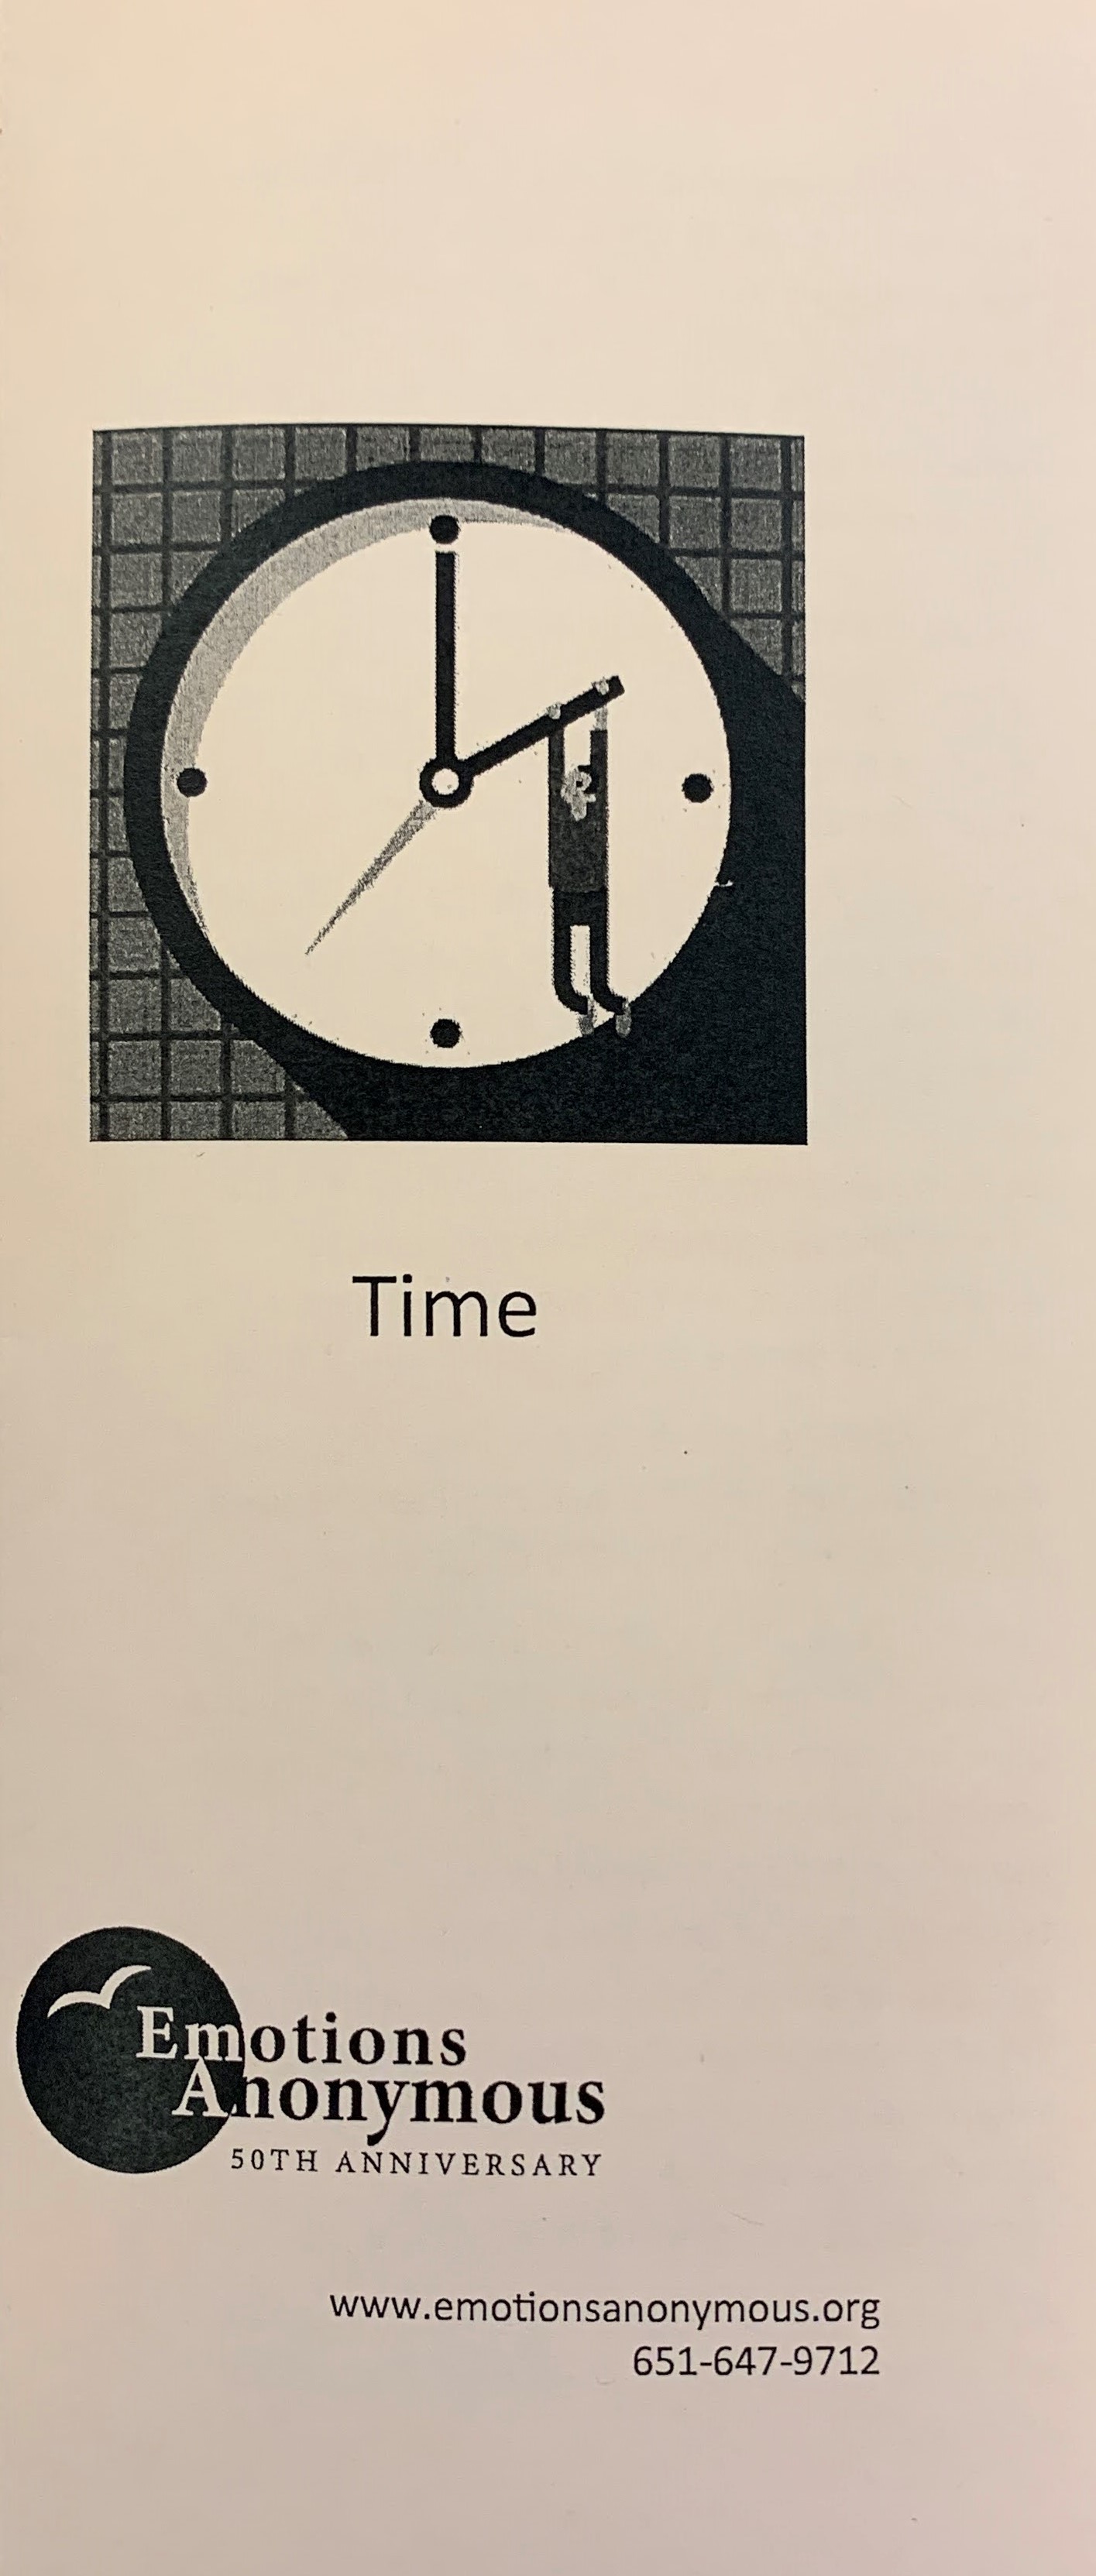 Item #99 — "Time" Pamphlet (New in 2021)